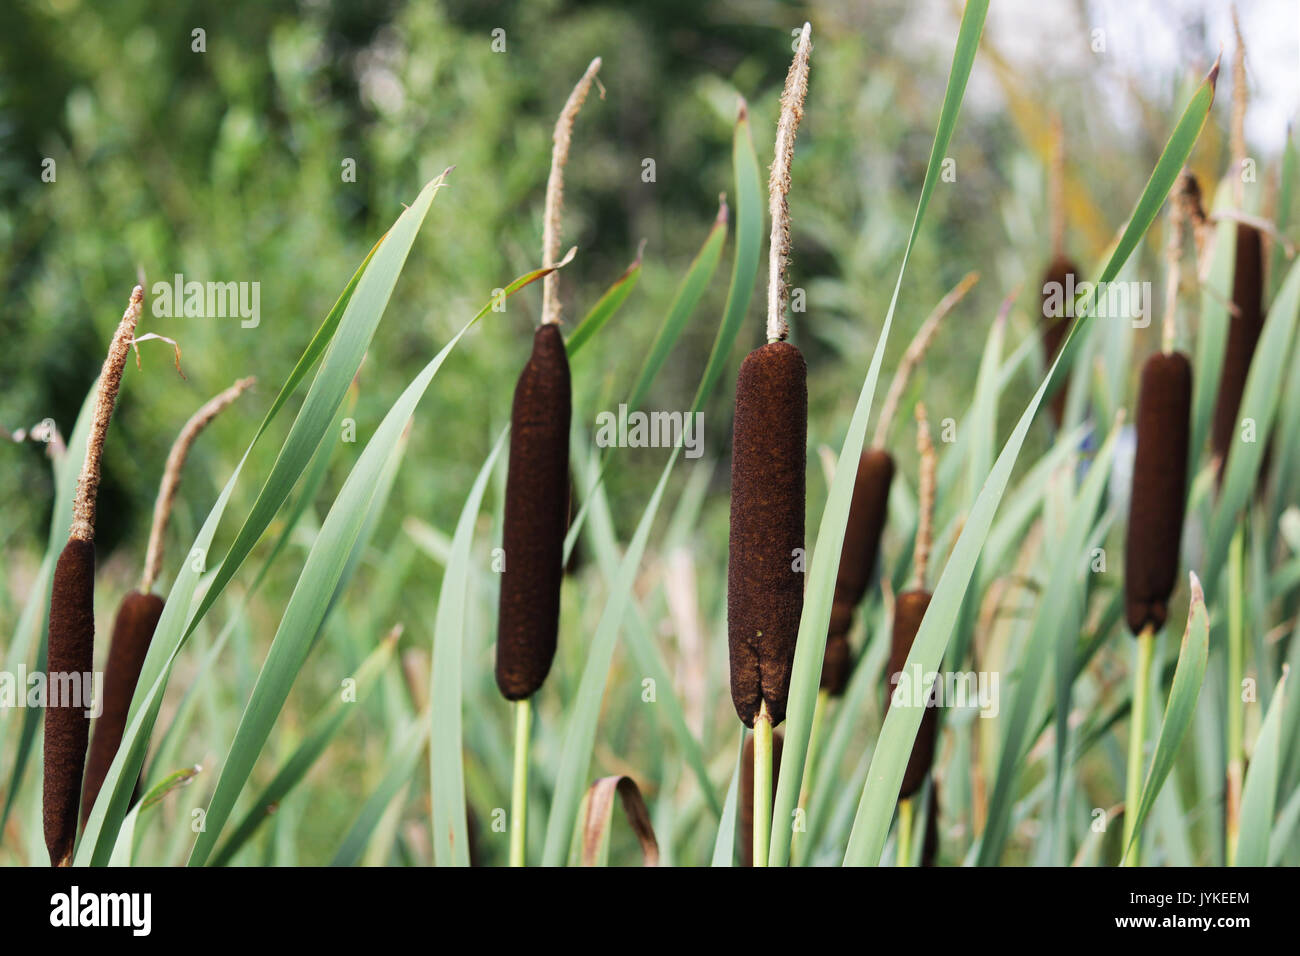 wetland-plant Typha latifolia, the Broadleaf cattail - from the cattail family Typhaceae Stock Photo